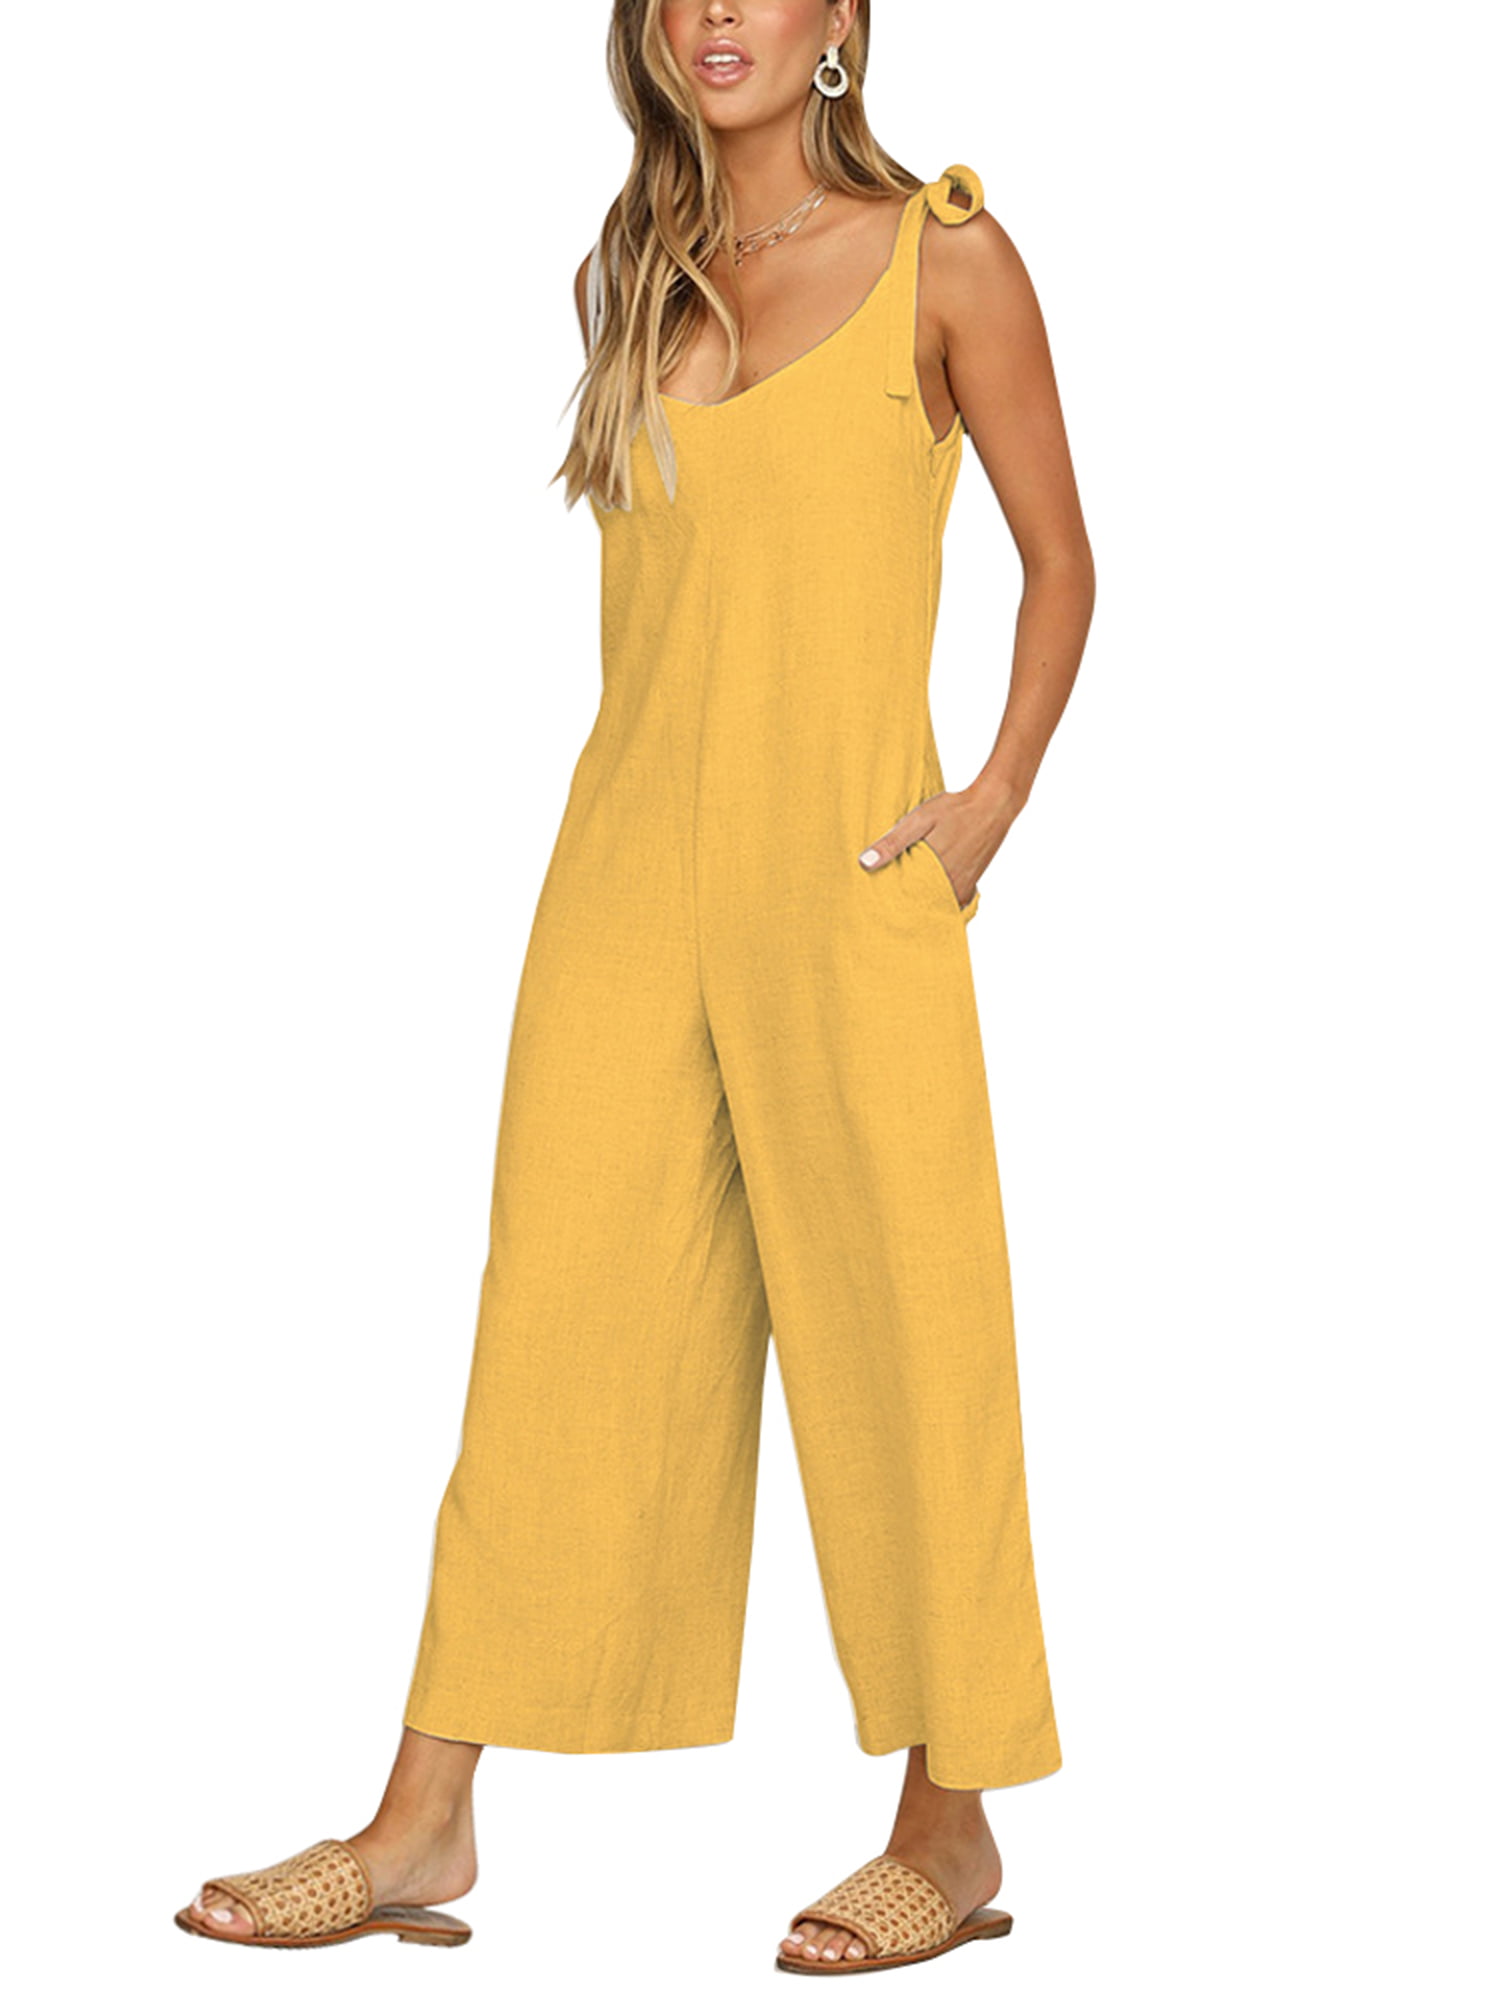 Ladies Jumpsuits and Rompers,POTO Women Sleeveless Dungarees Loose Cotton Playsuit Jumpsuit Long Pants Romper Overalls 